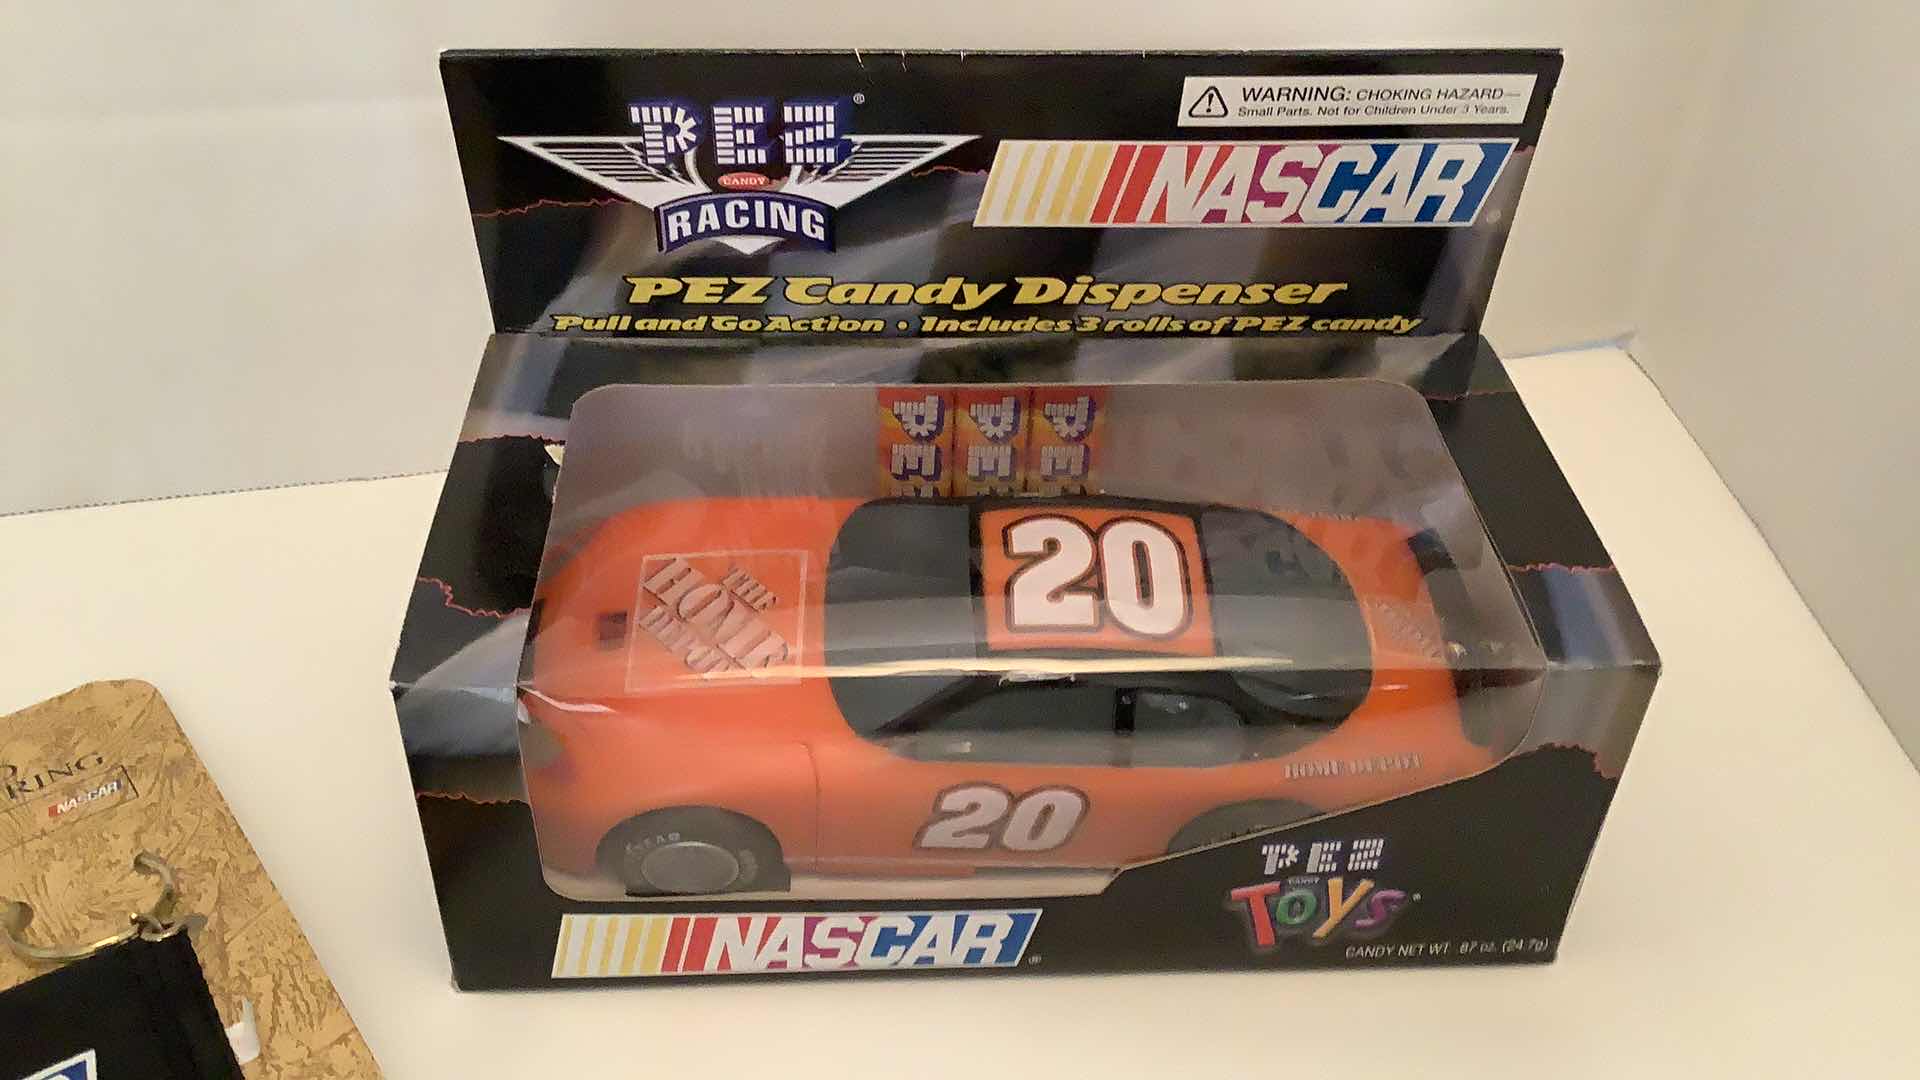 Photo 3 of NASCAR #20 PEZ CANDY DISPENSER AND CARD CASE